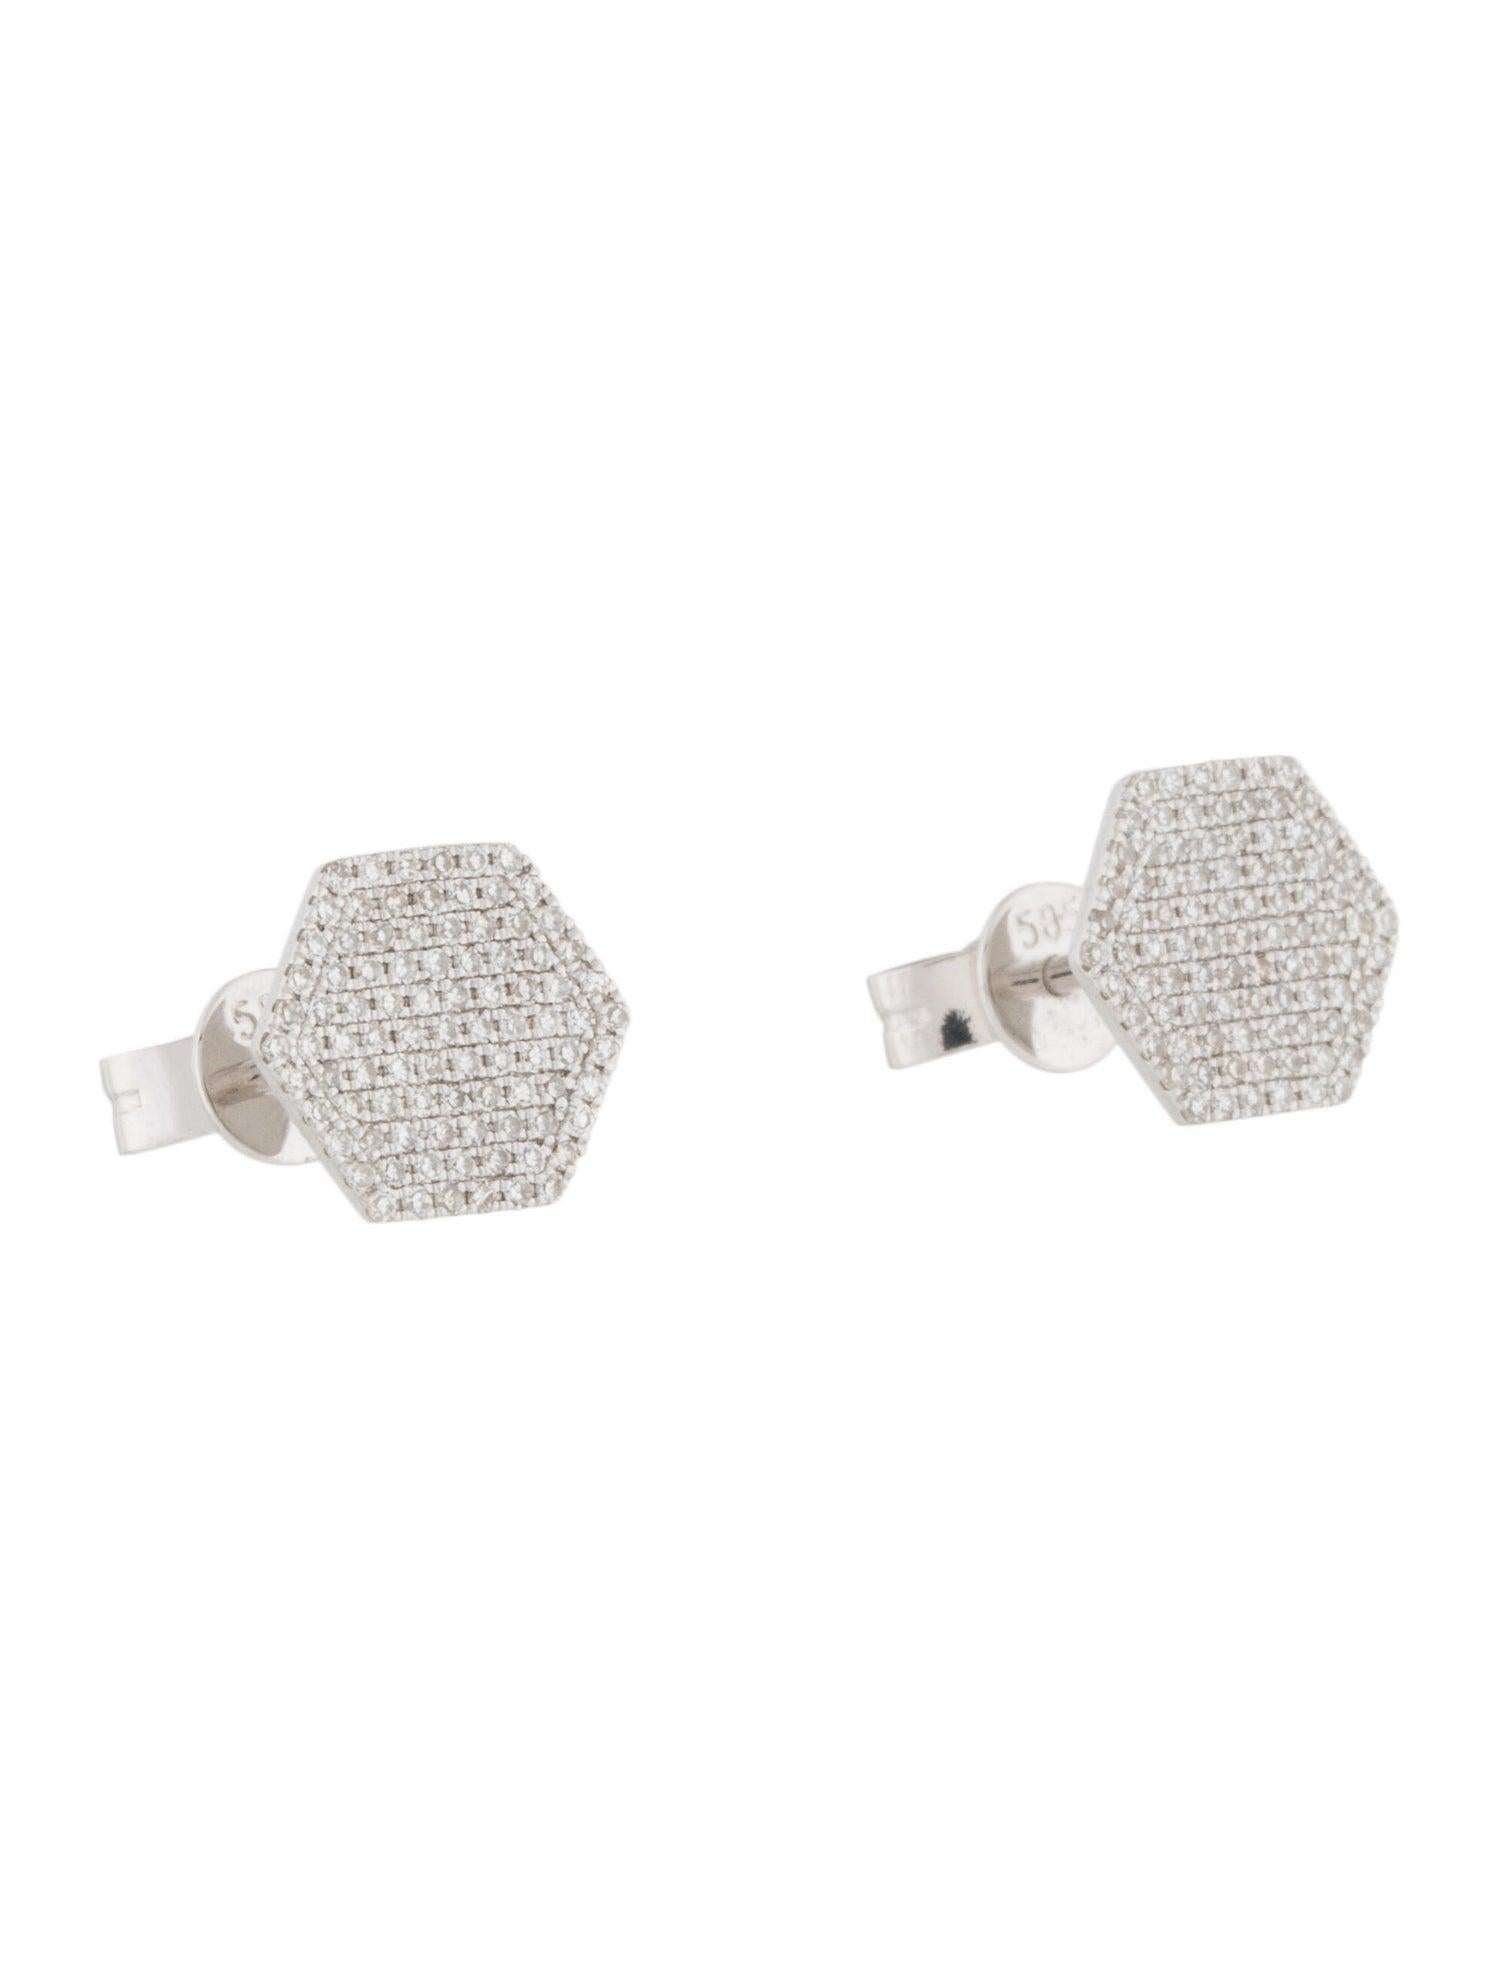 Pave Hexagon Stud Earrings: Crafted of real 14k gold, these popular Pave Hexagon Stud shape earrings feature 182 natural white sparkling diamonds approximately 0.35 ct. Certified diamonds. Diamond Color & Clarity GH-SI1 Measures approximately 1/2